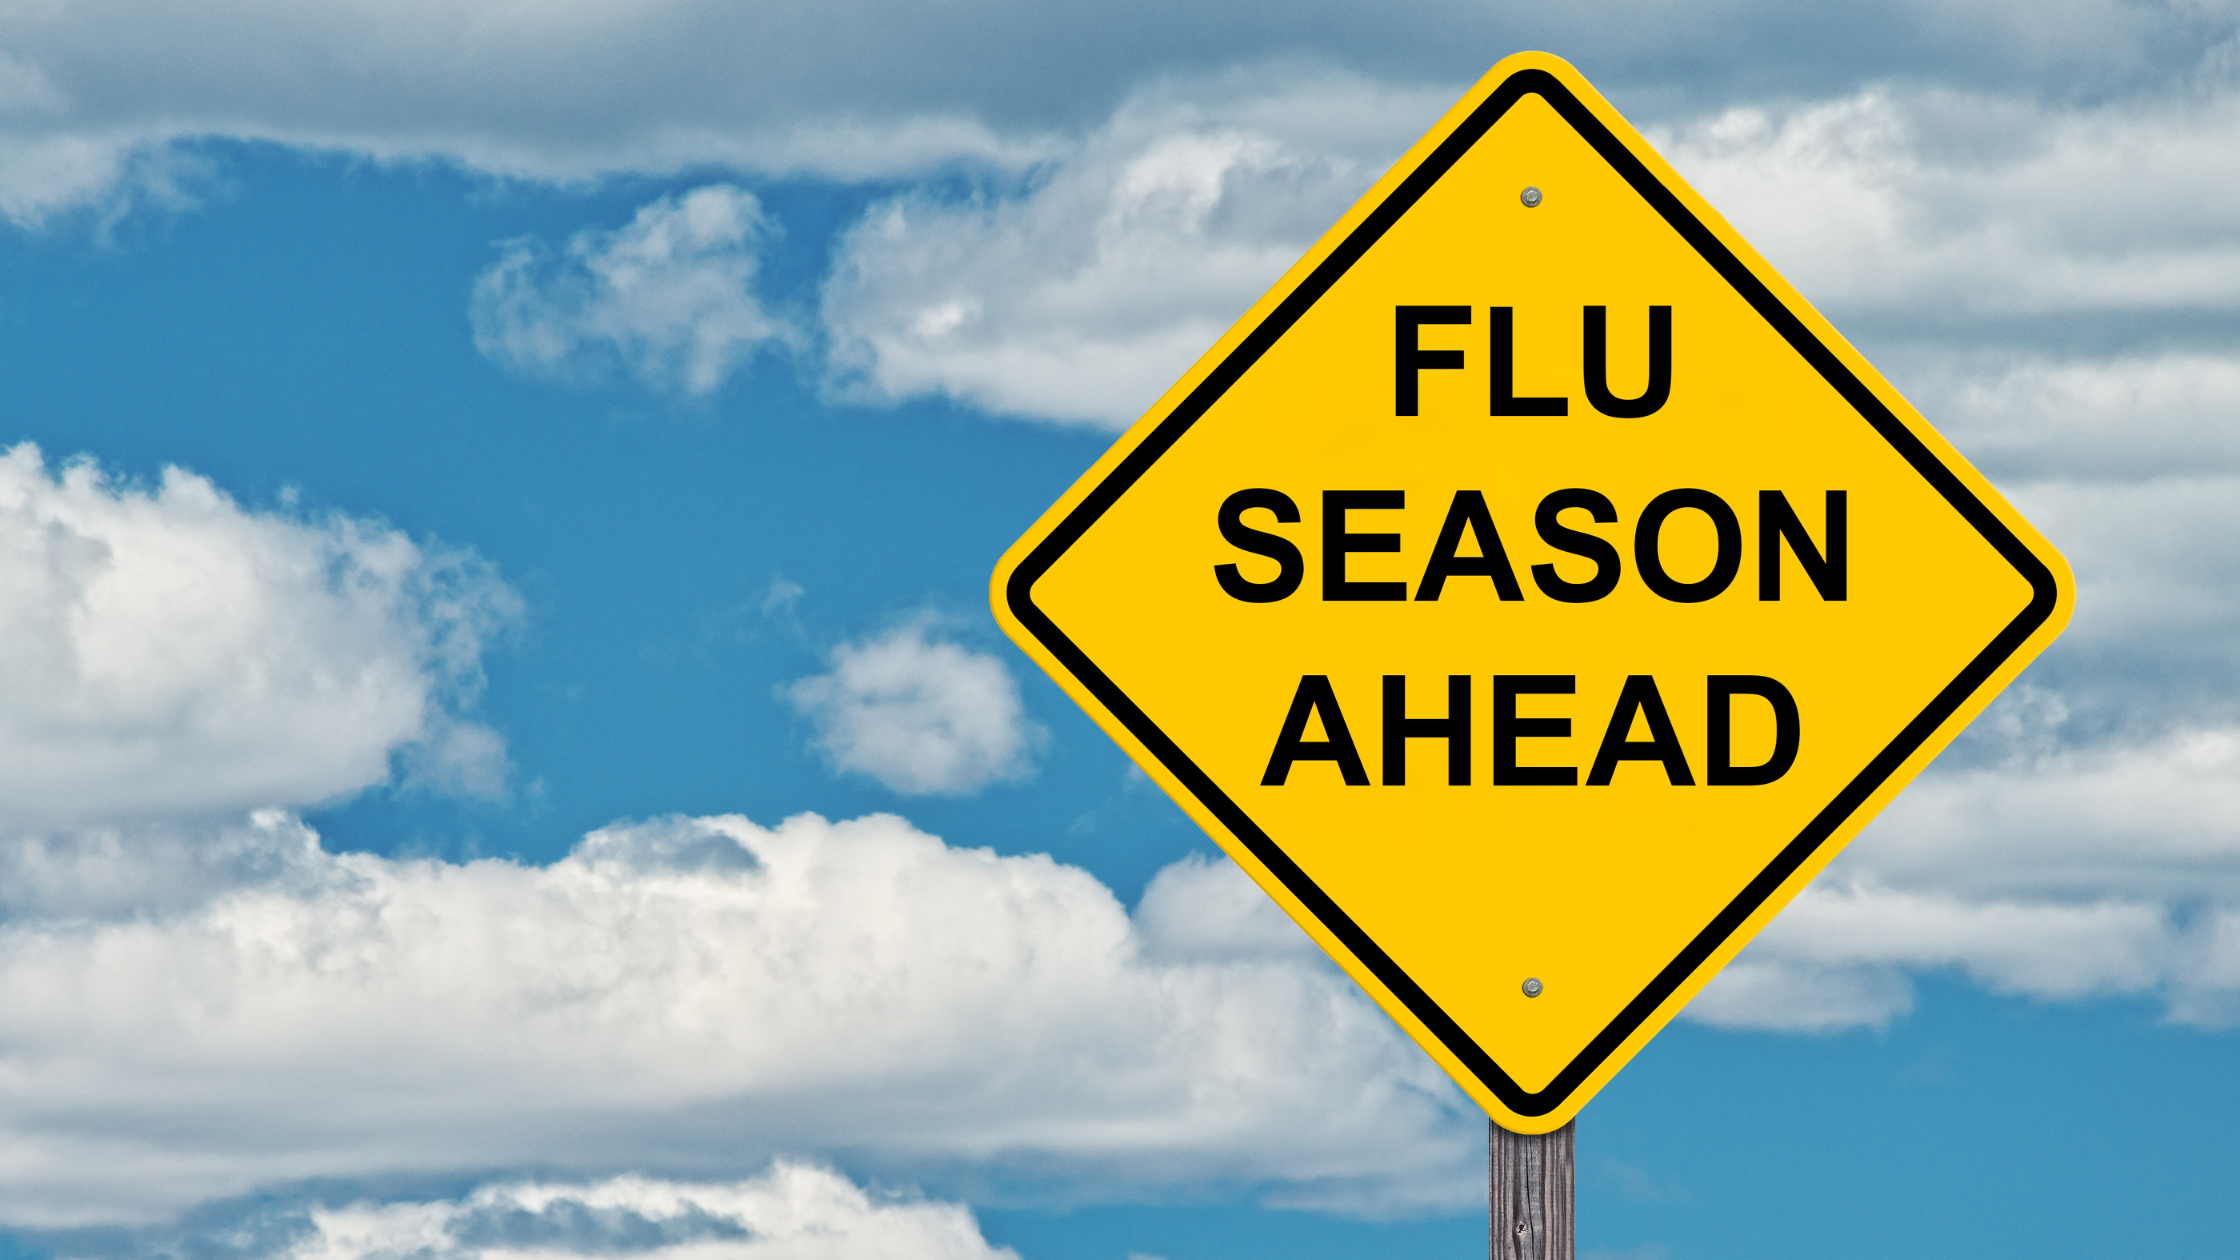 Importance of Having a Commercial Janitorial Company during Flu Season